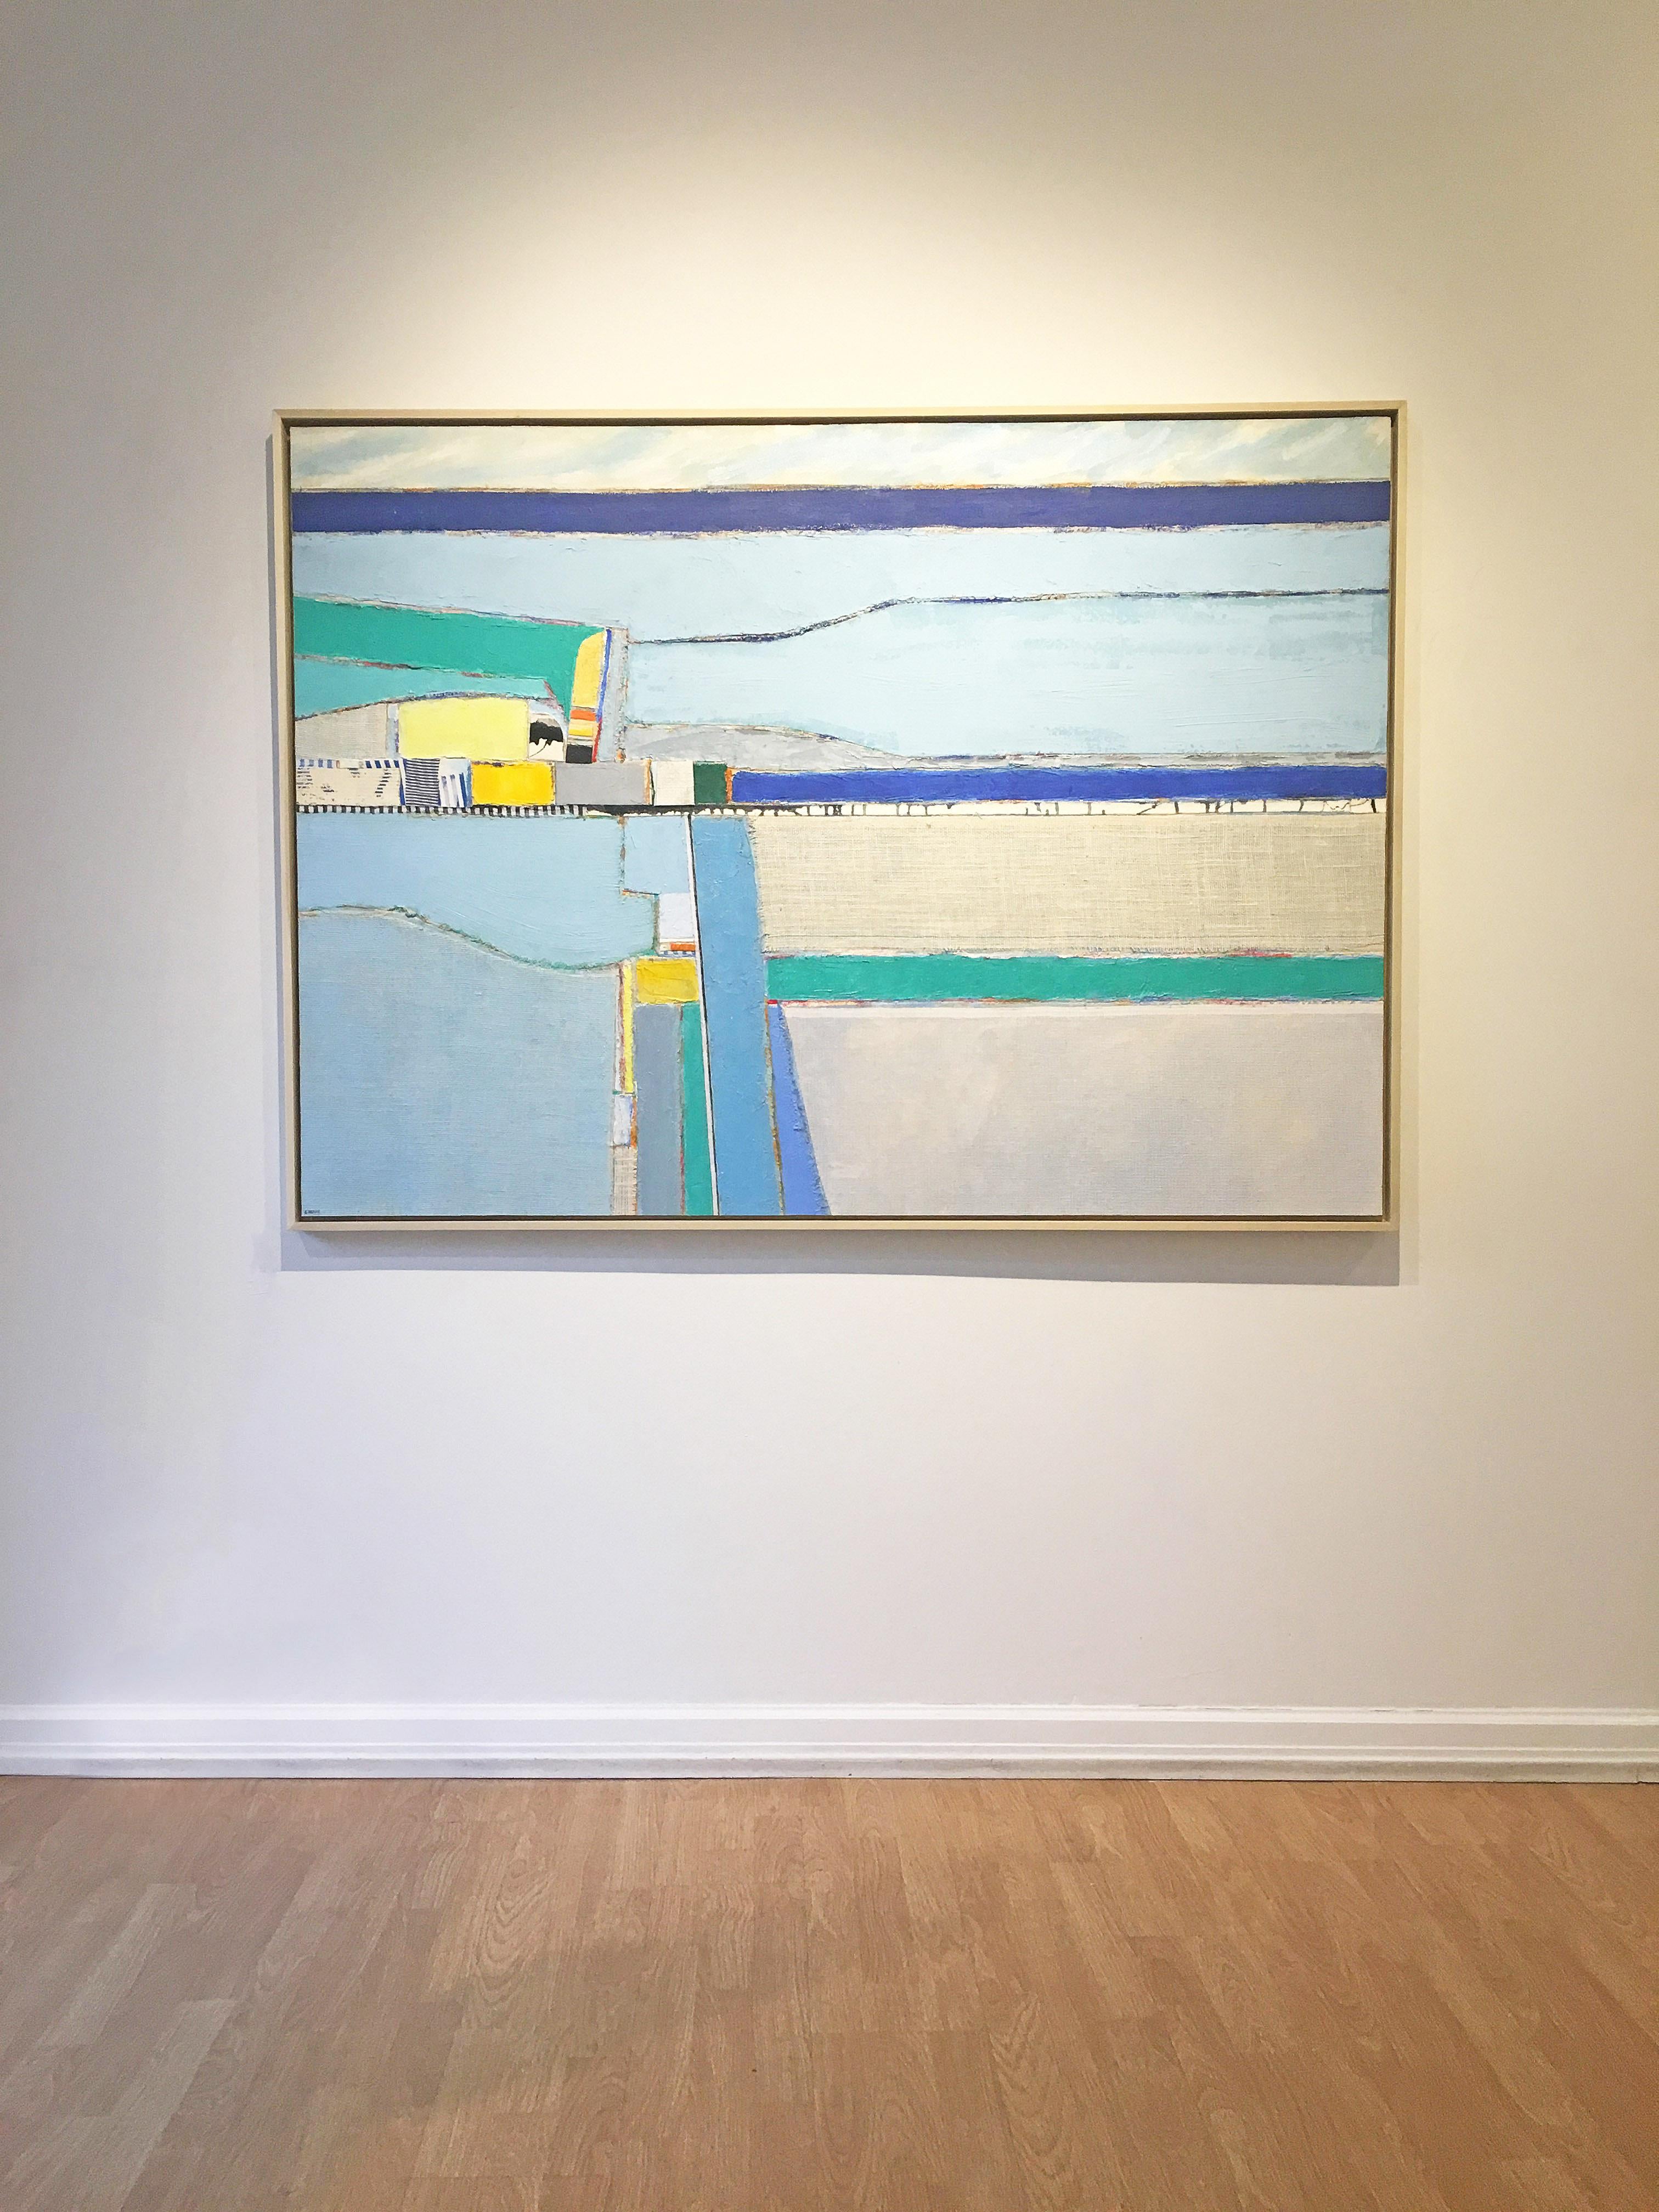 'Dubois Beach' by Eugene Healy, 2018. Oil and fabric collage on canvas, 46.25 x 63.75 in. / Frame: 48 x 65.75 in. This landscape painting features an abstracted coastal scene with land and sea in aerial view. In calming colors of dark blue, light